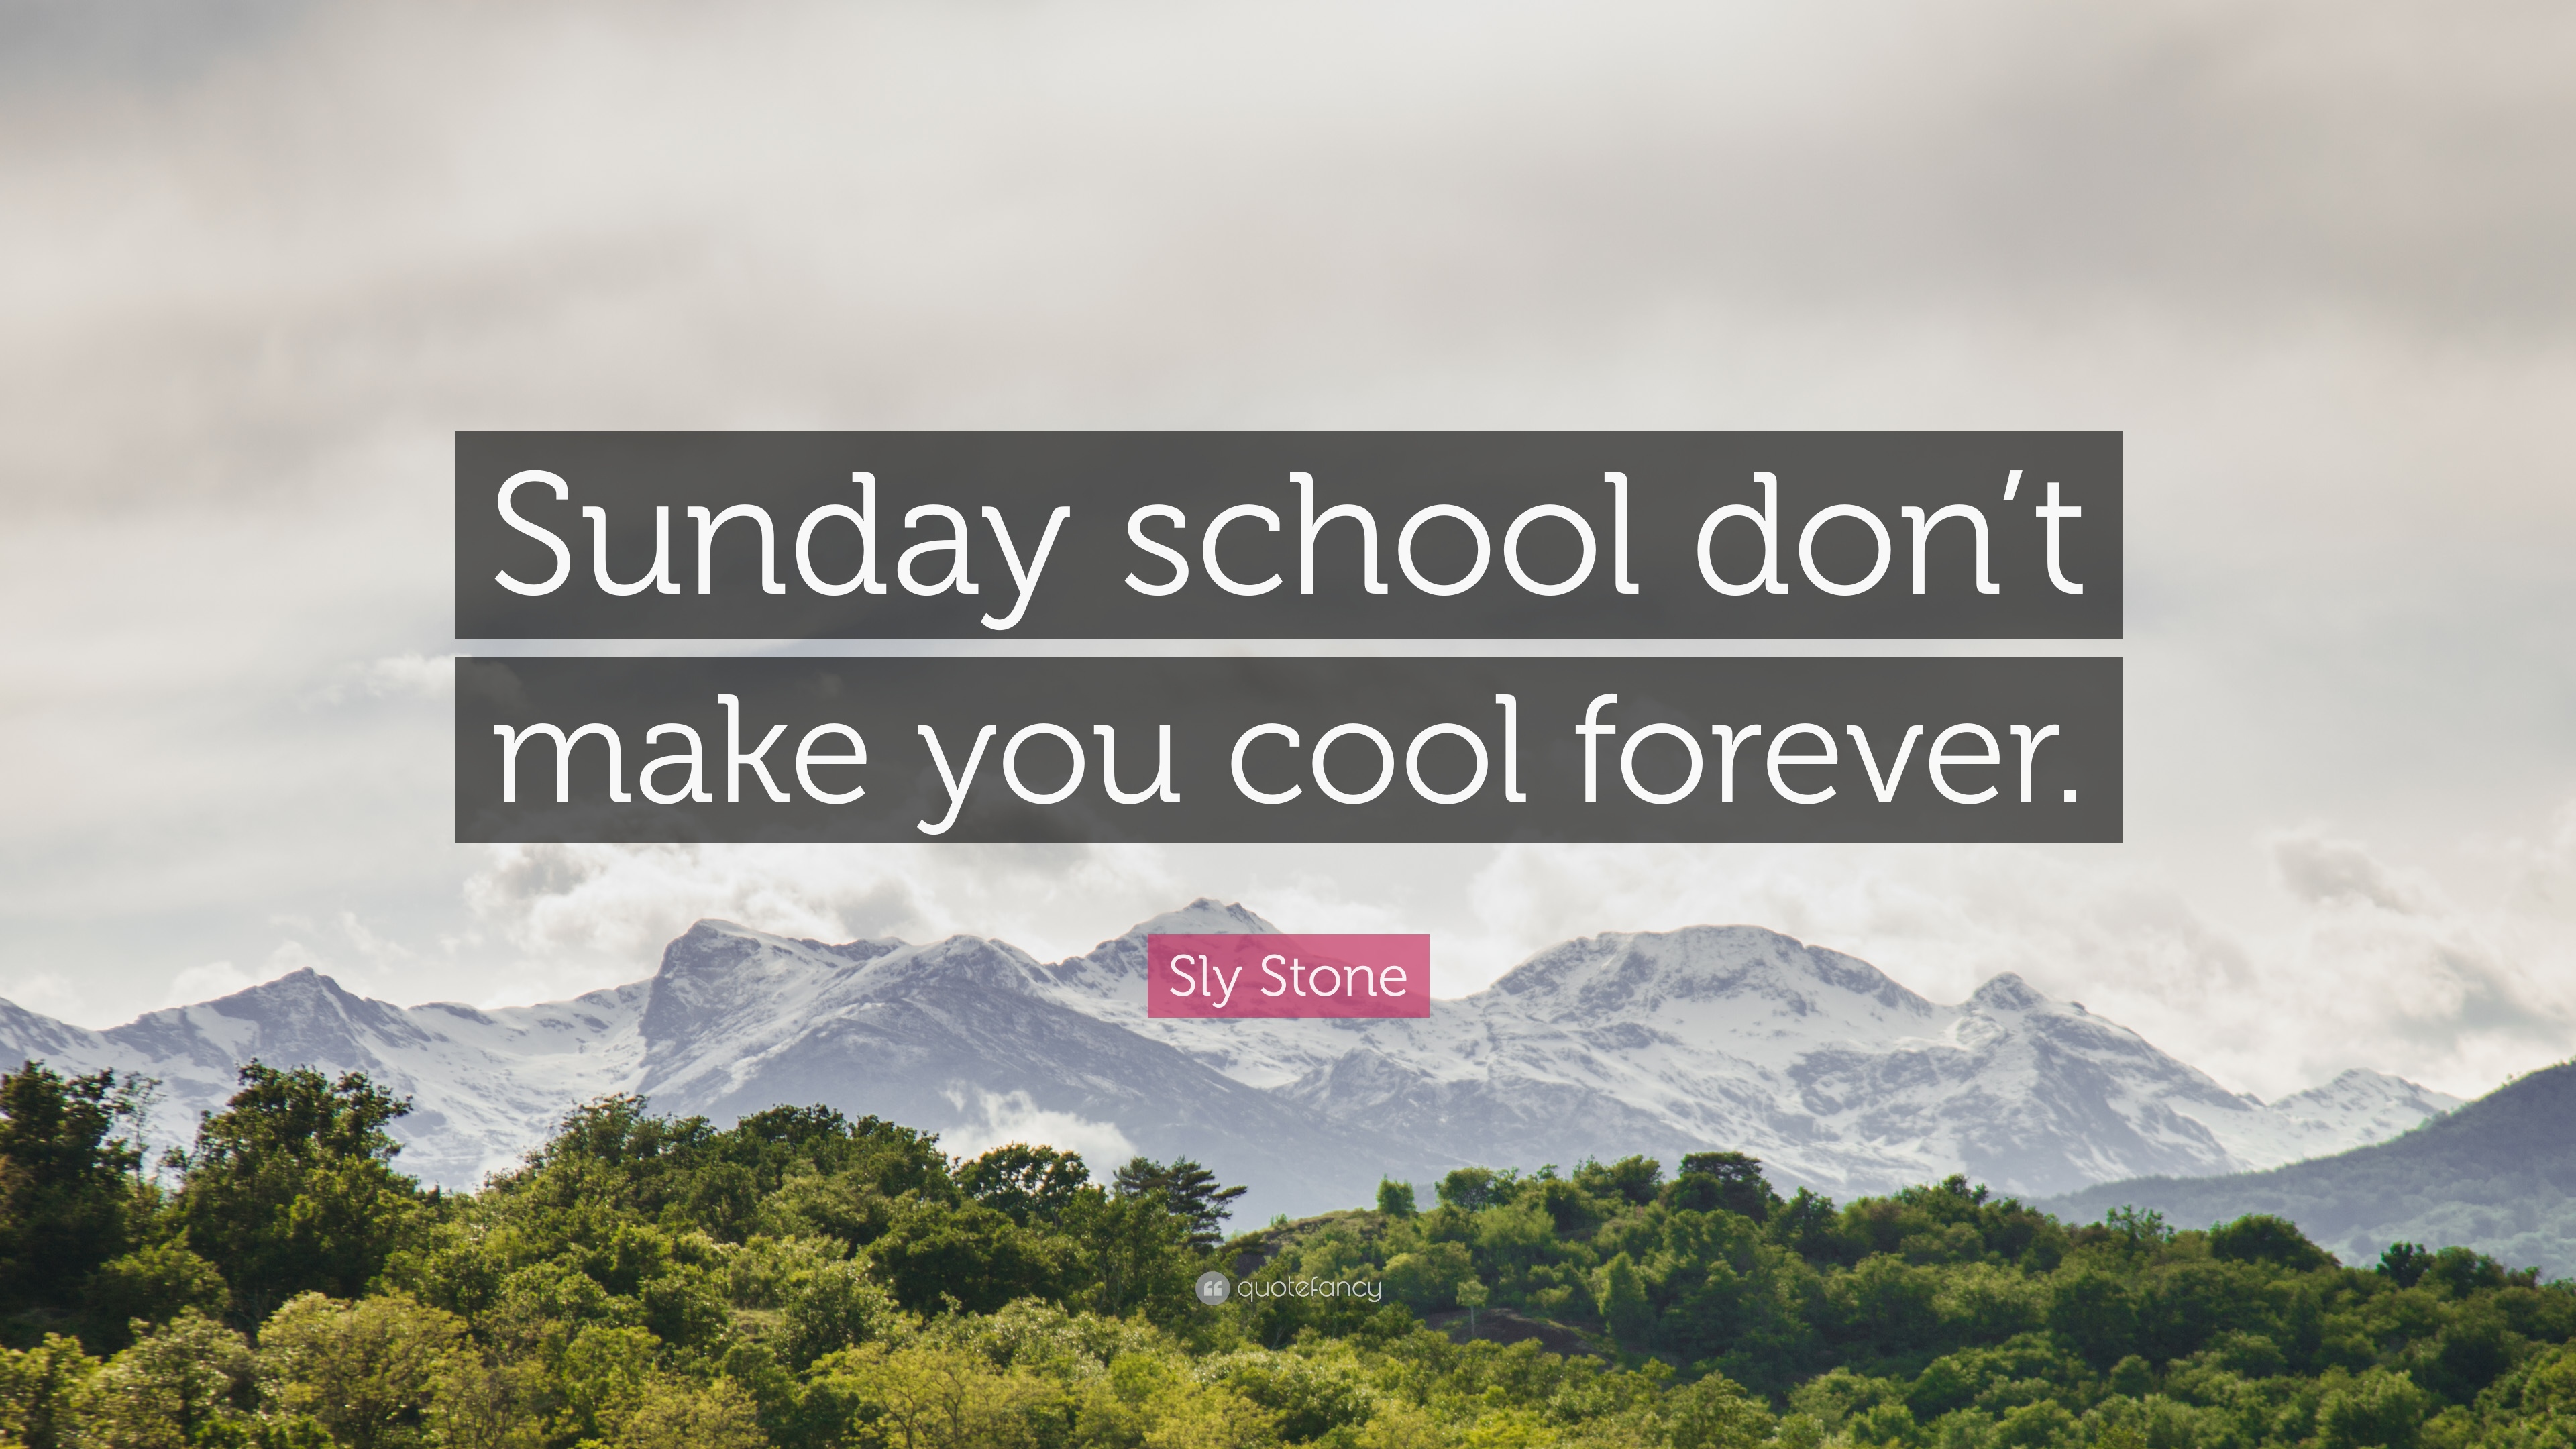 Sly Stone Quote: “Sunday school don't make you cool forever.”